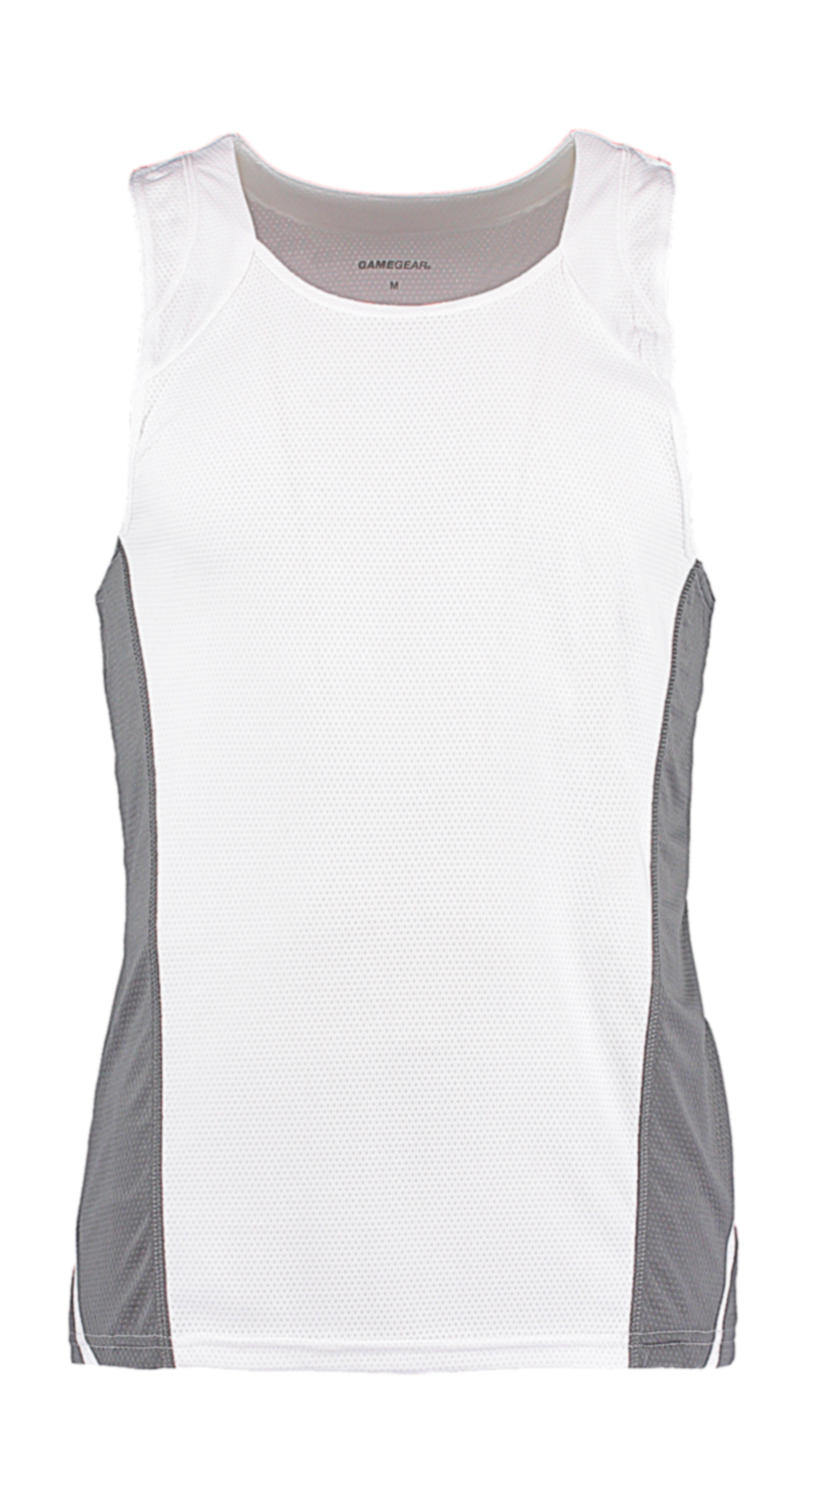  Regular Fit Cooltex? Vest  in Farbe White/Grey